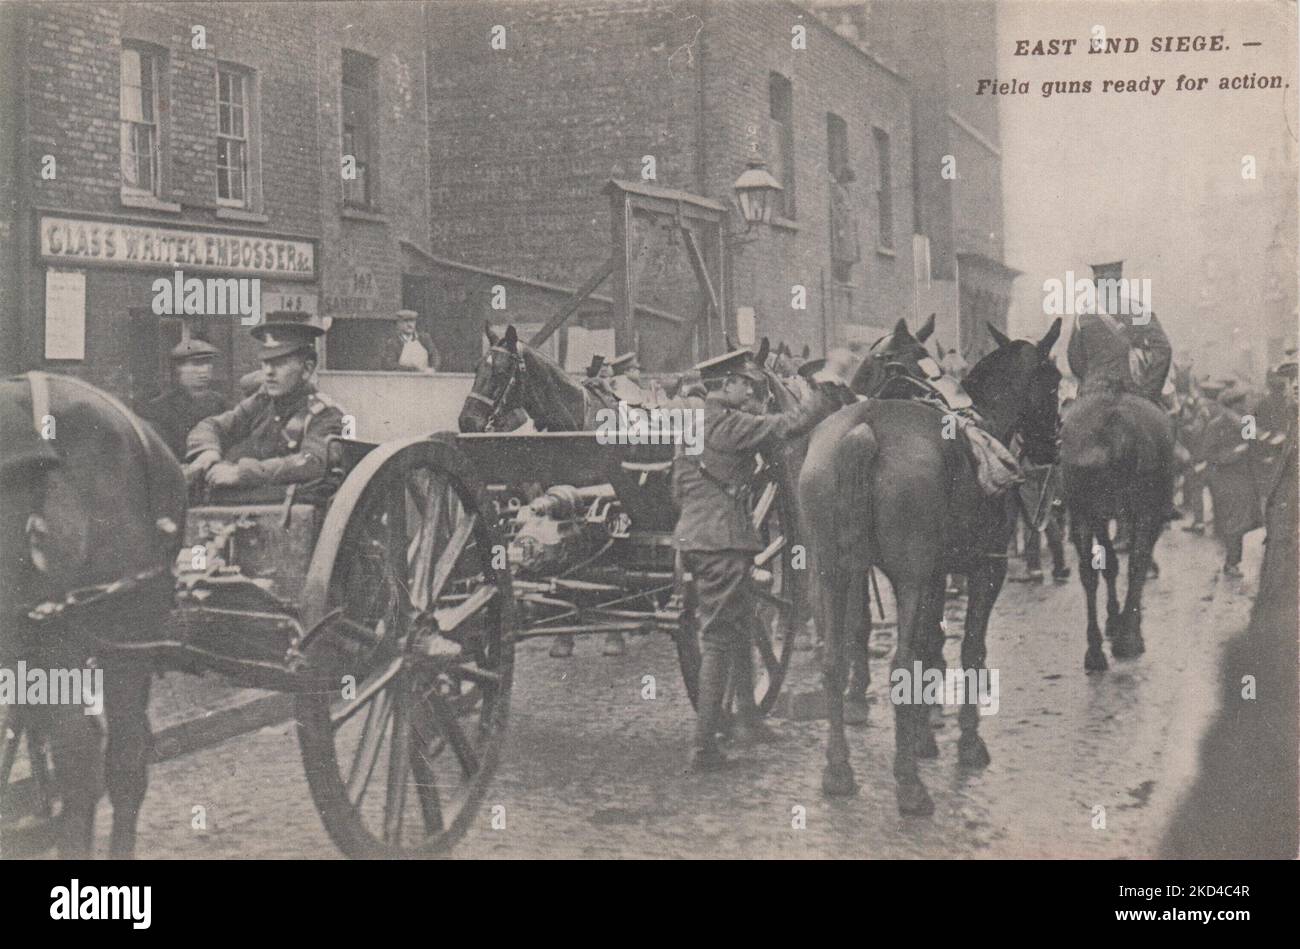 'East End Siege. - Field guns ready for action': postcard of the 1911 Siege of Sidney Street, showing field guns loaded on to horse drawn carriages, other soldiers and army horses are next to them. Several curious onlookers can be seen in the background Stock Photo